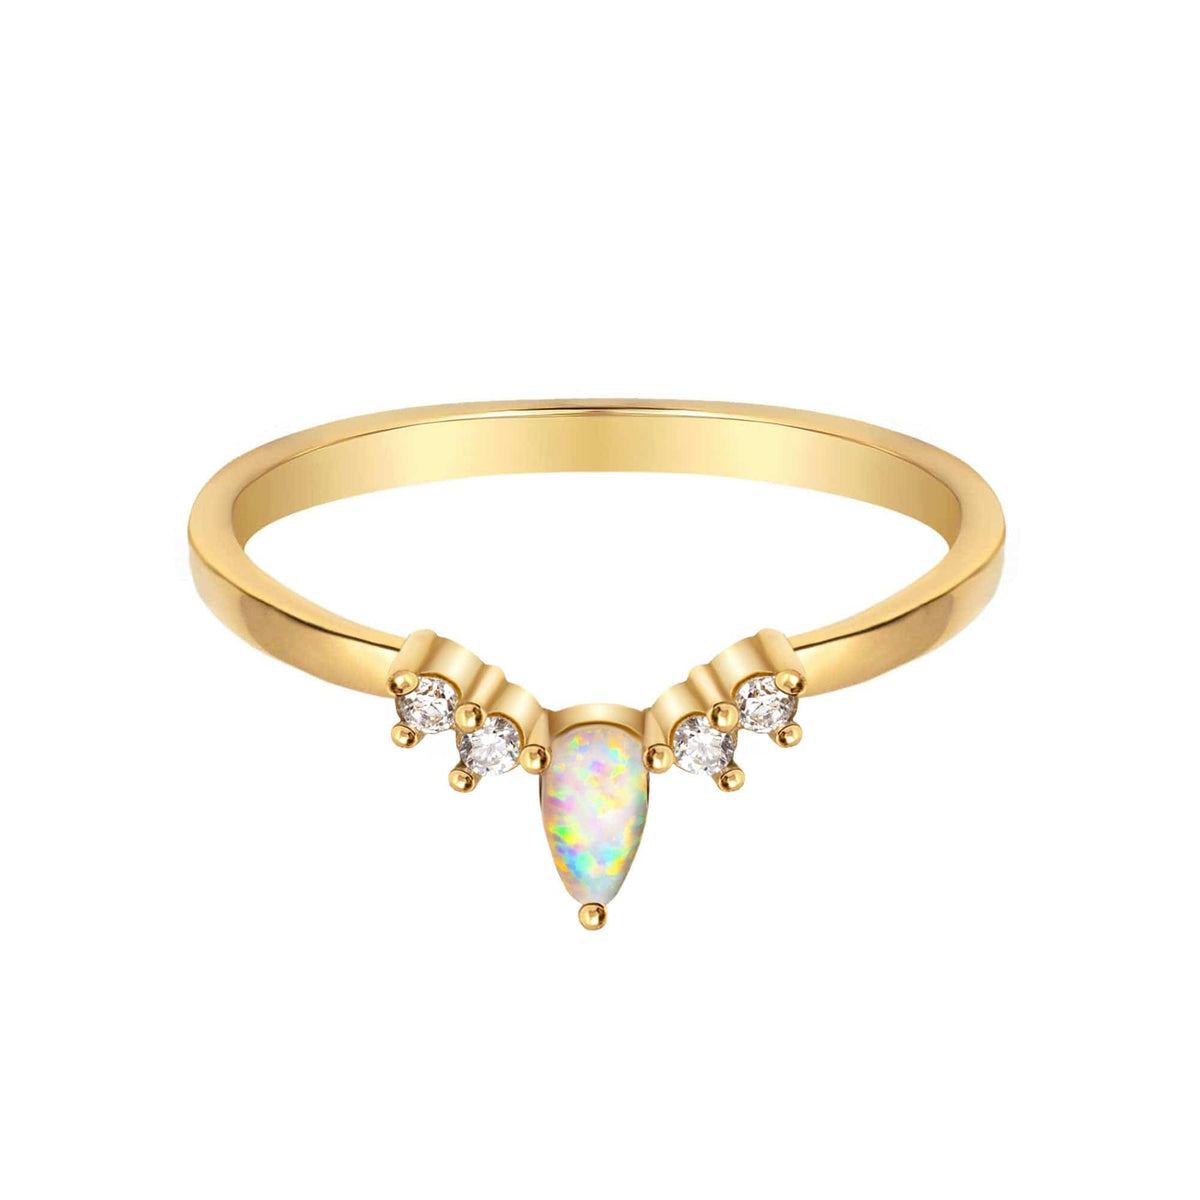 BohoMoon Stainless Steel Georgia Opal Ring Gold / US 6 / UK L / EUR 51 (small)